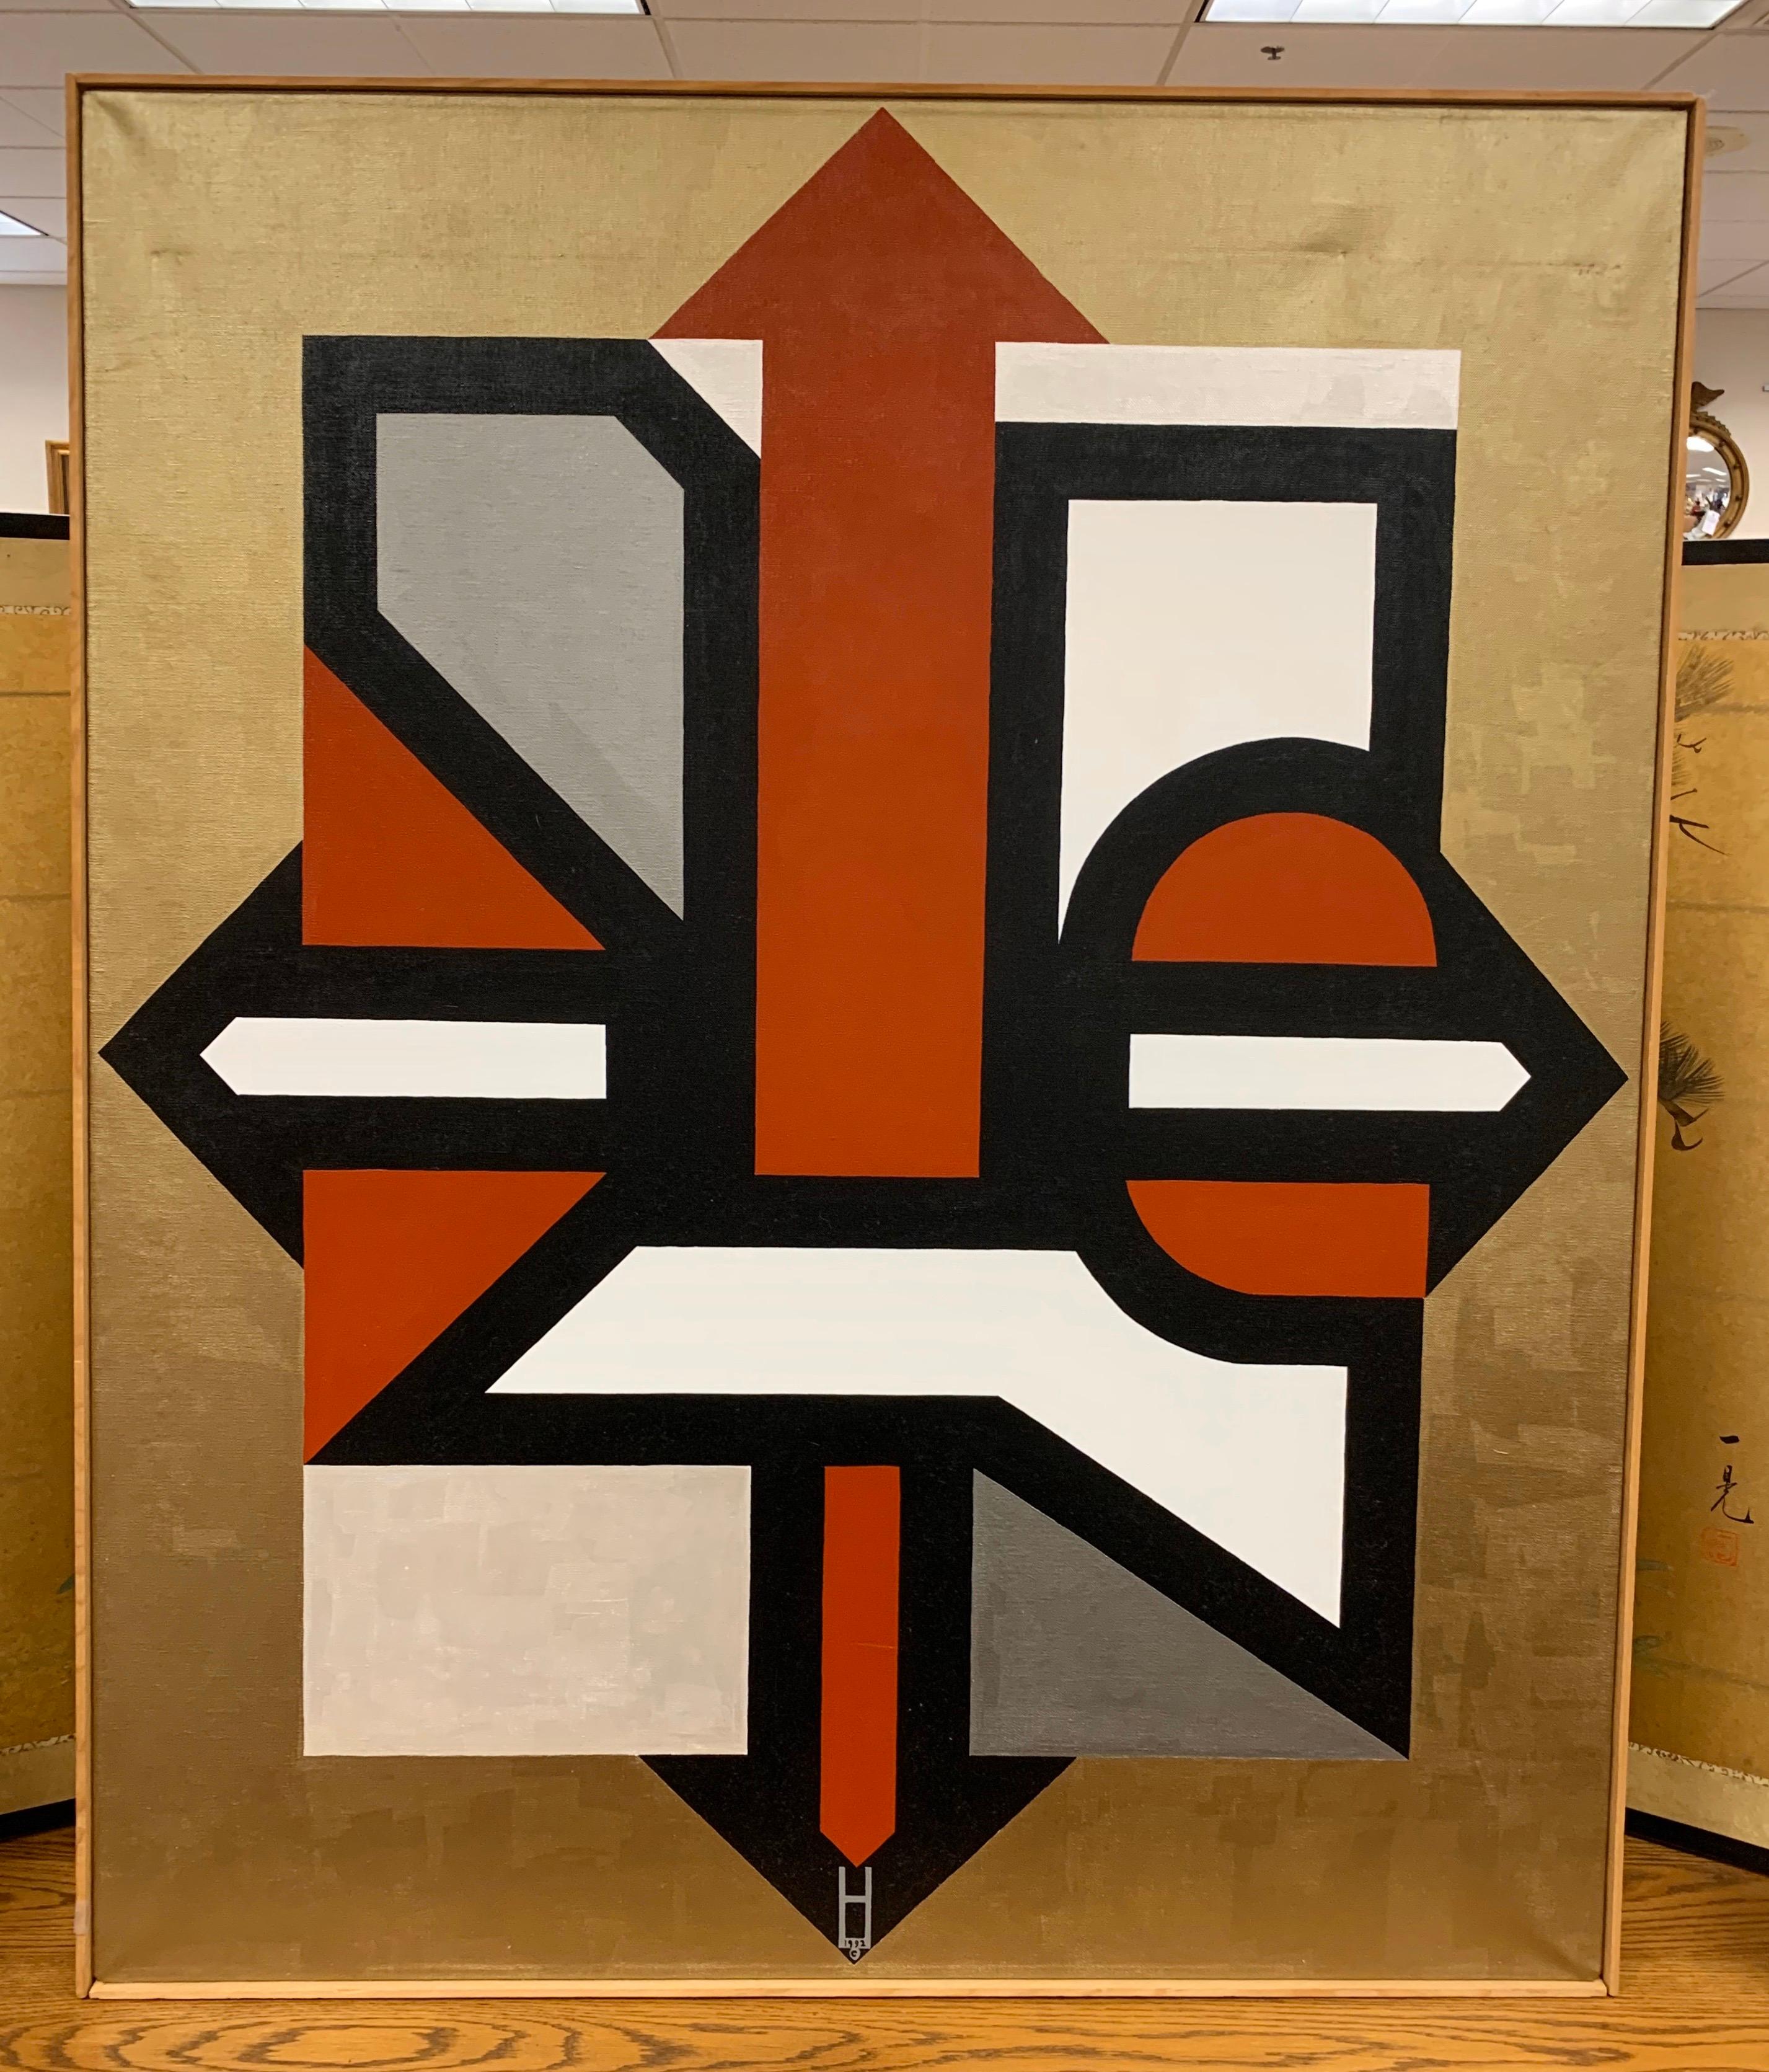 But with that coveted Mid-Century Modern look, this signed abstract painting
is signed by the artist with the symbol as shown at bottom of painting, circa 1990s. Dated 1992.